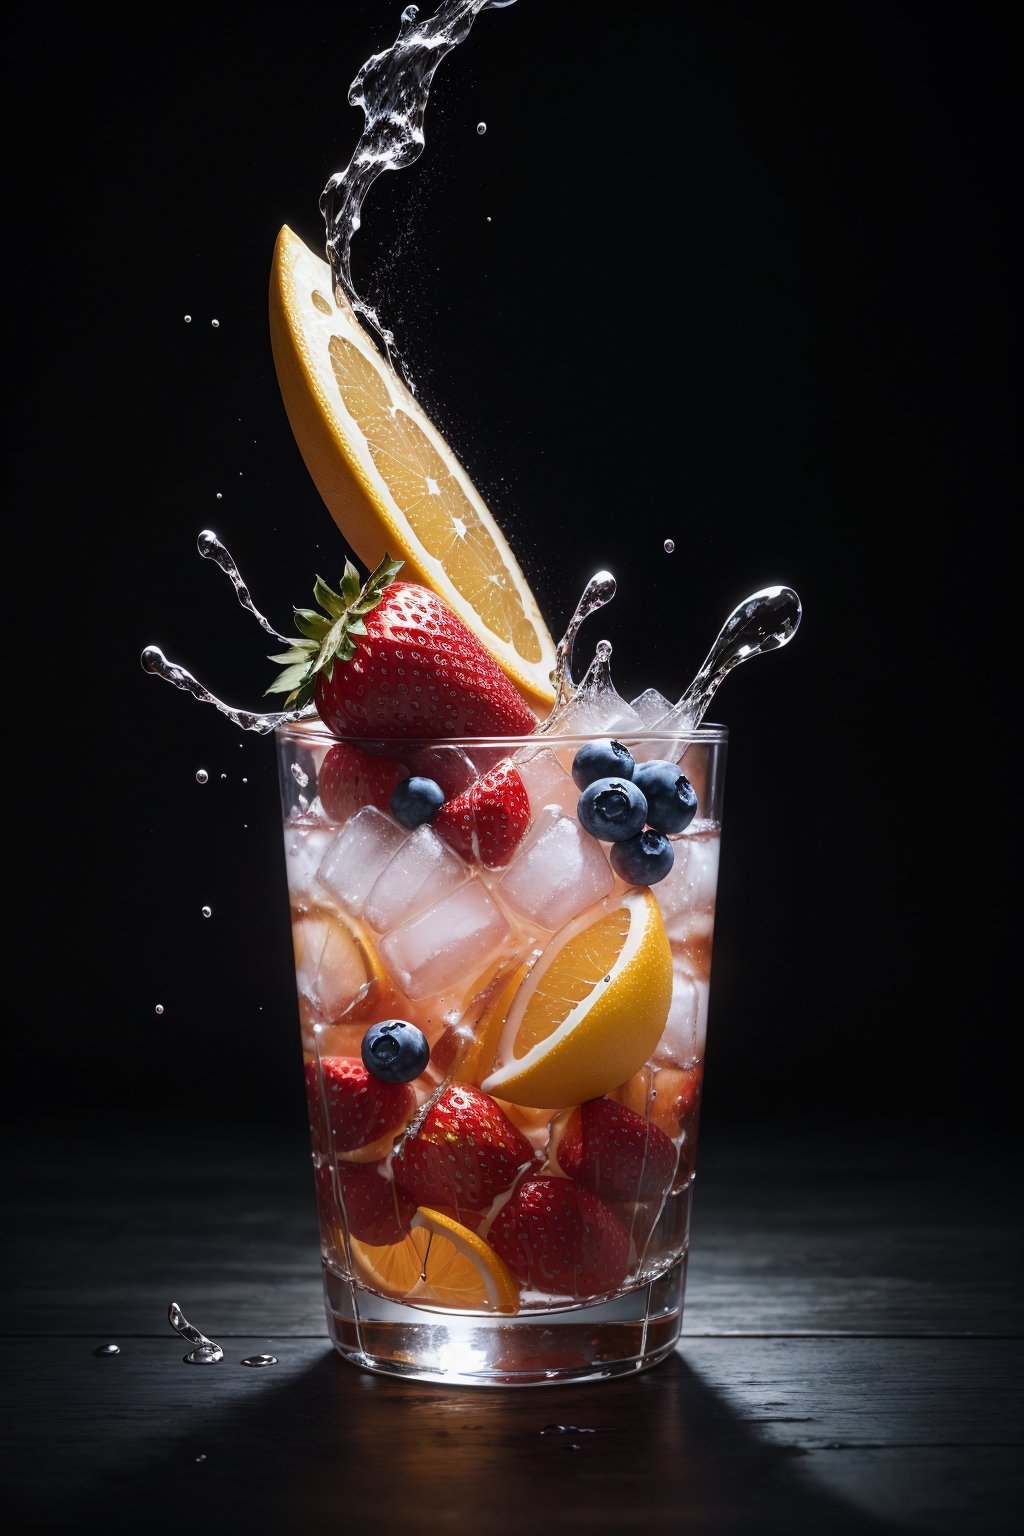 (Cinematic Photo:1.3) of (Realistic:1.3) a studio shot of a (exploding:0.2) (Fruit in low gravity:1.1) (Splashing:0.9) a glass of water with strawberries, oranges and blueberries in it, splash image, full-color, on a canva, splashes of liquid, drinks, a fruit basket, strong red hue, hgh, evokes delight, water swirling, by Fred Marcellino, top selection on unsplash, professional food photography, art photography. black background